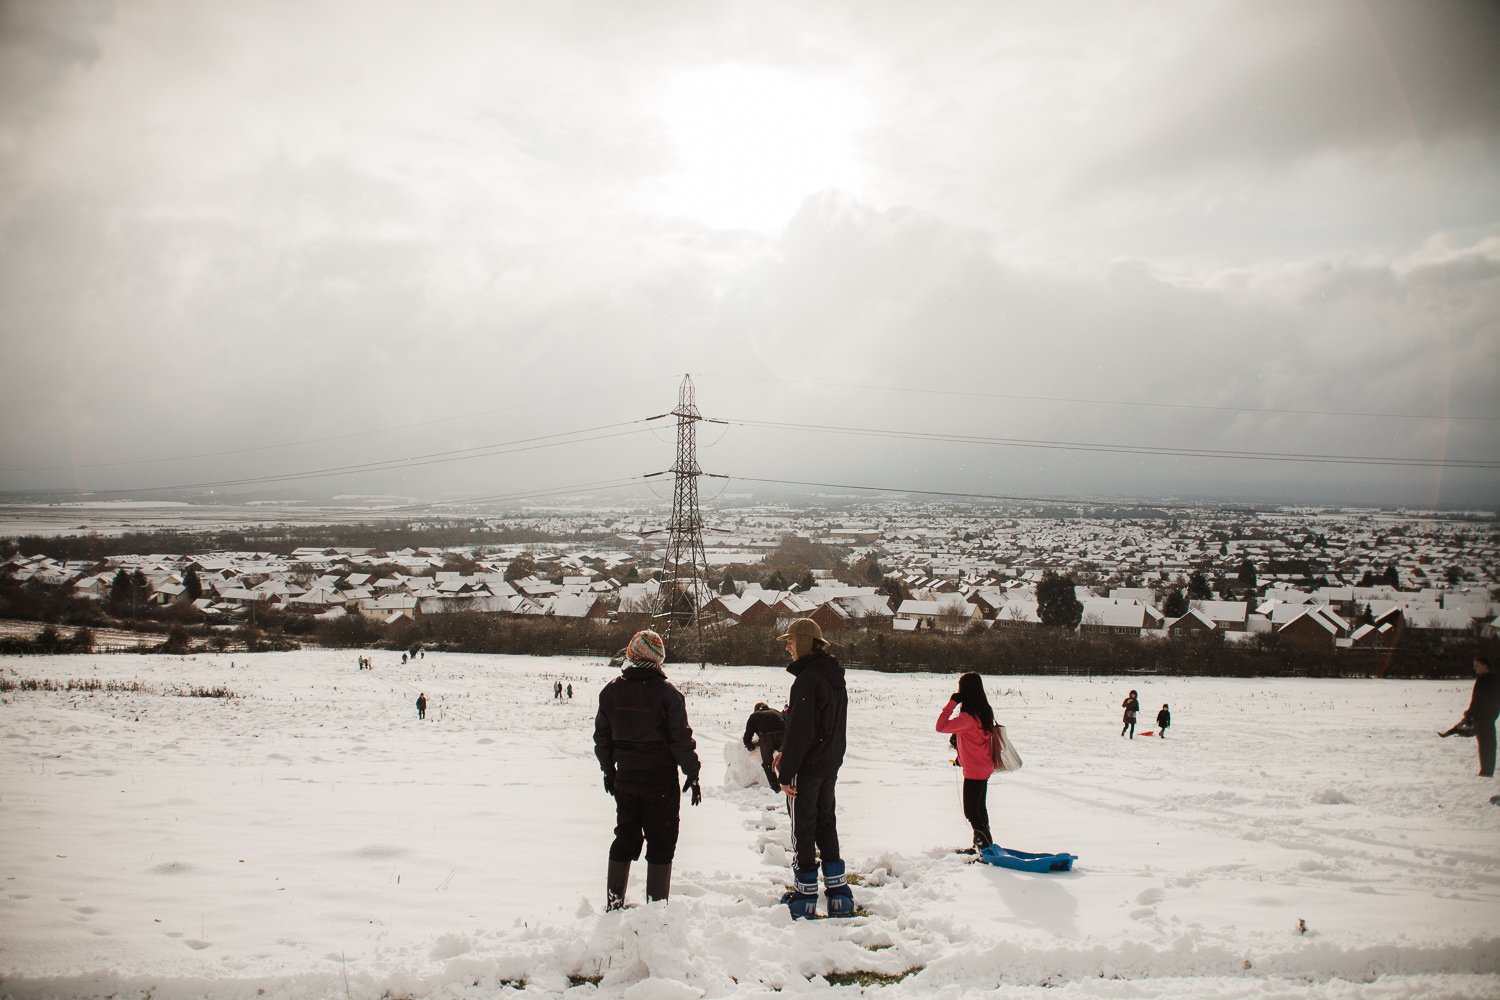 People enjoying the snowy scenery at Bushy Hill, also known locally as Radar Hill, with a view overlooking South Woodham Ferrers.